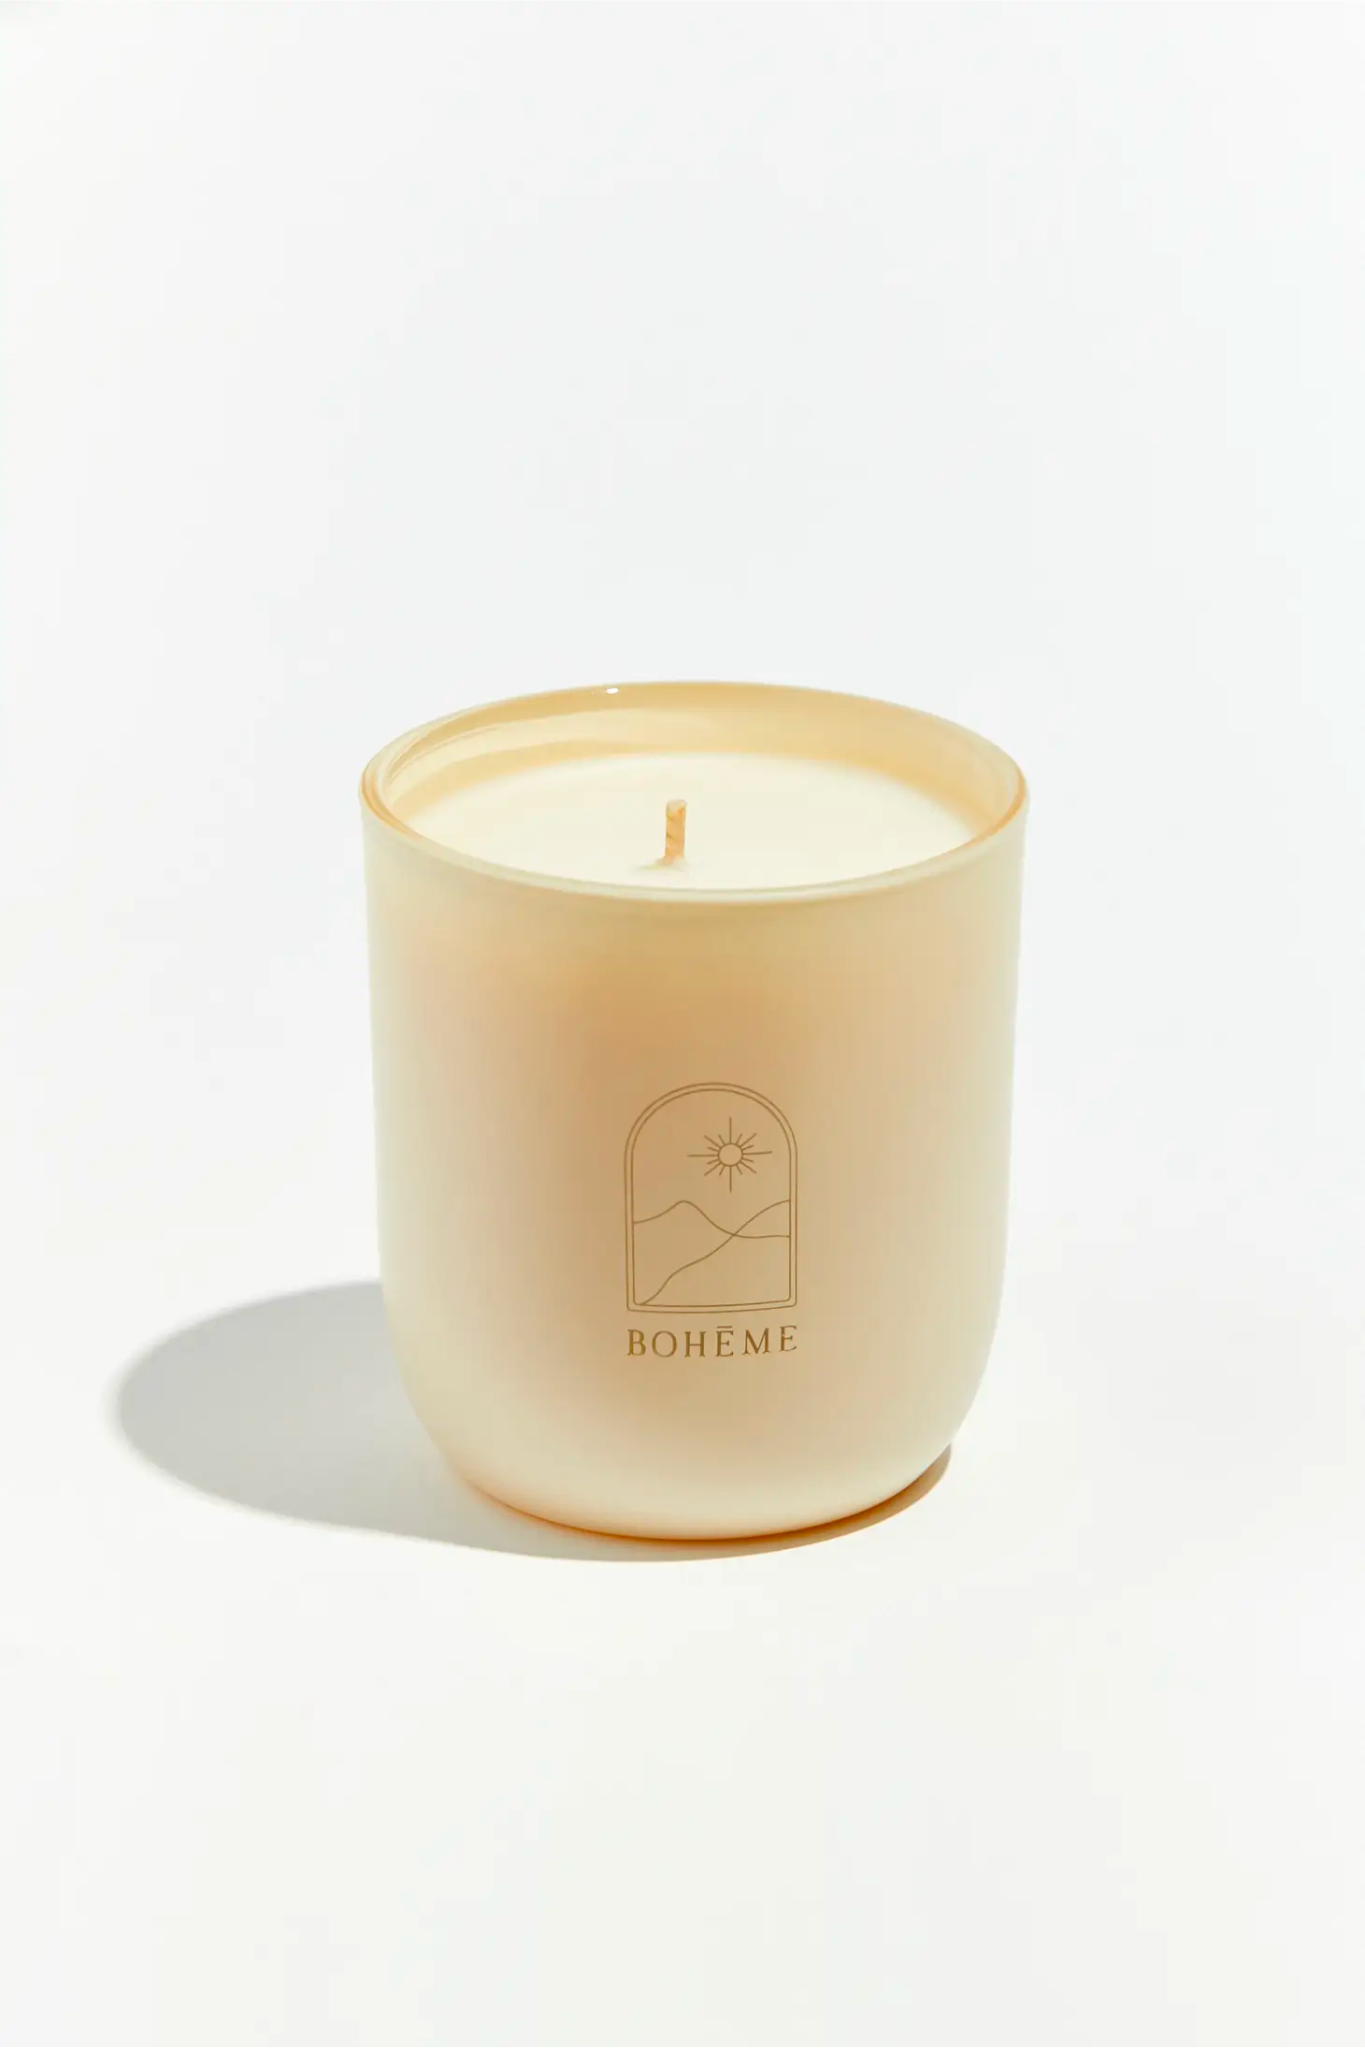 View 2 of Boheme Arabia Candle, a Candles from Larrea Cove. Detail: .